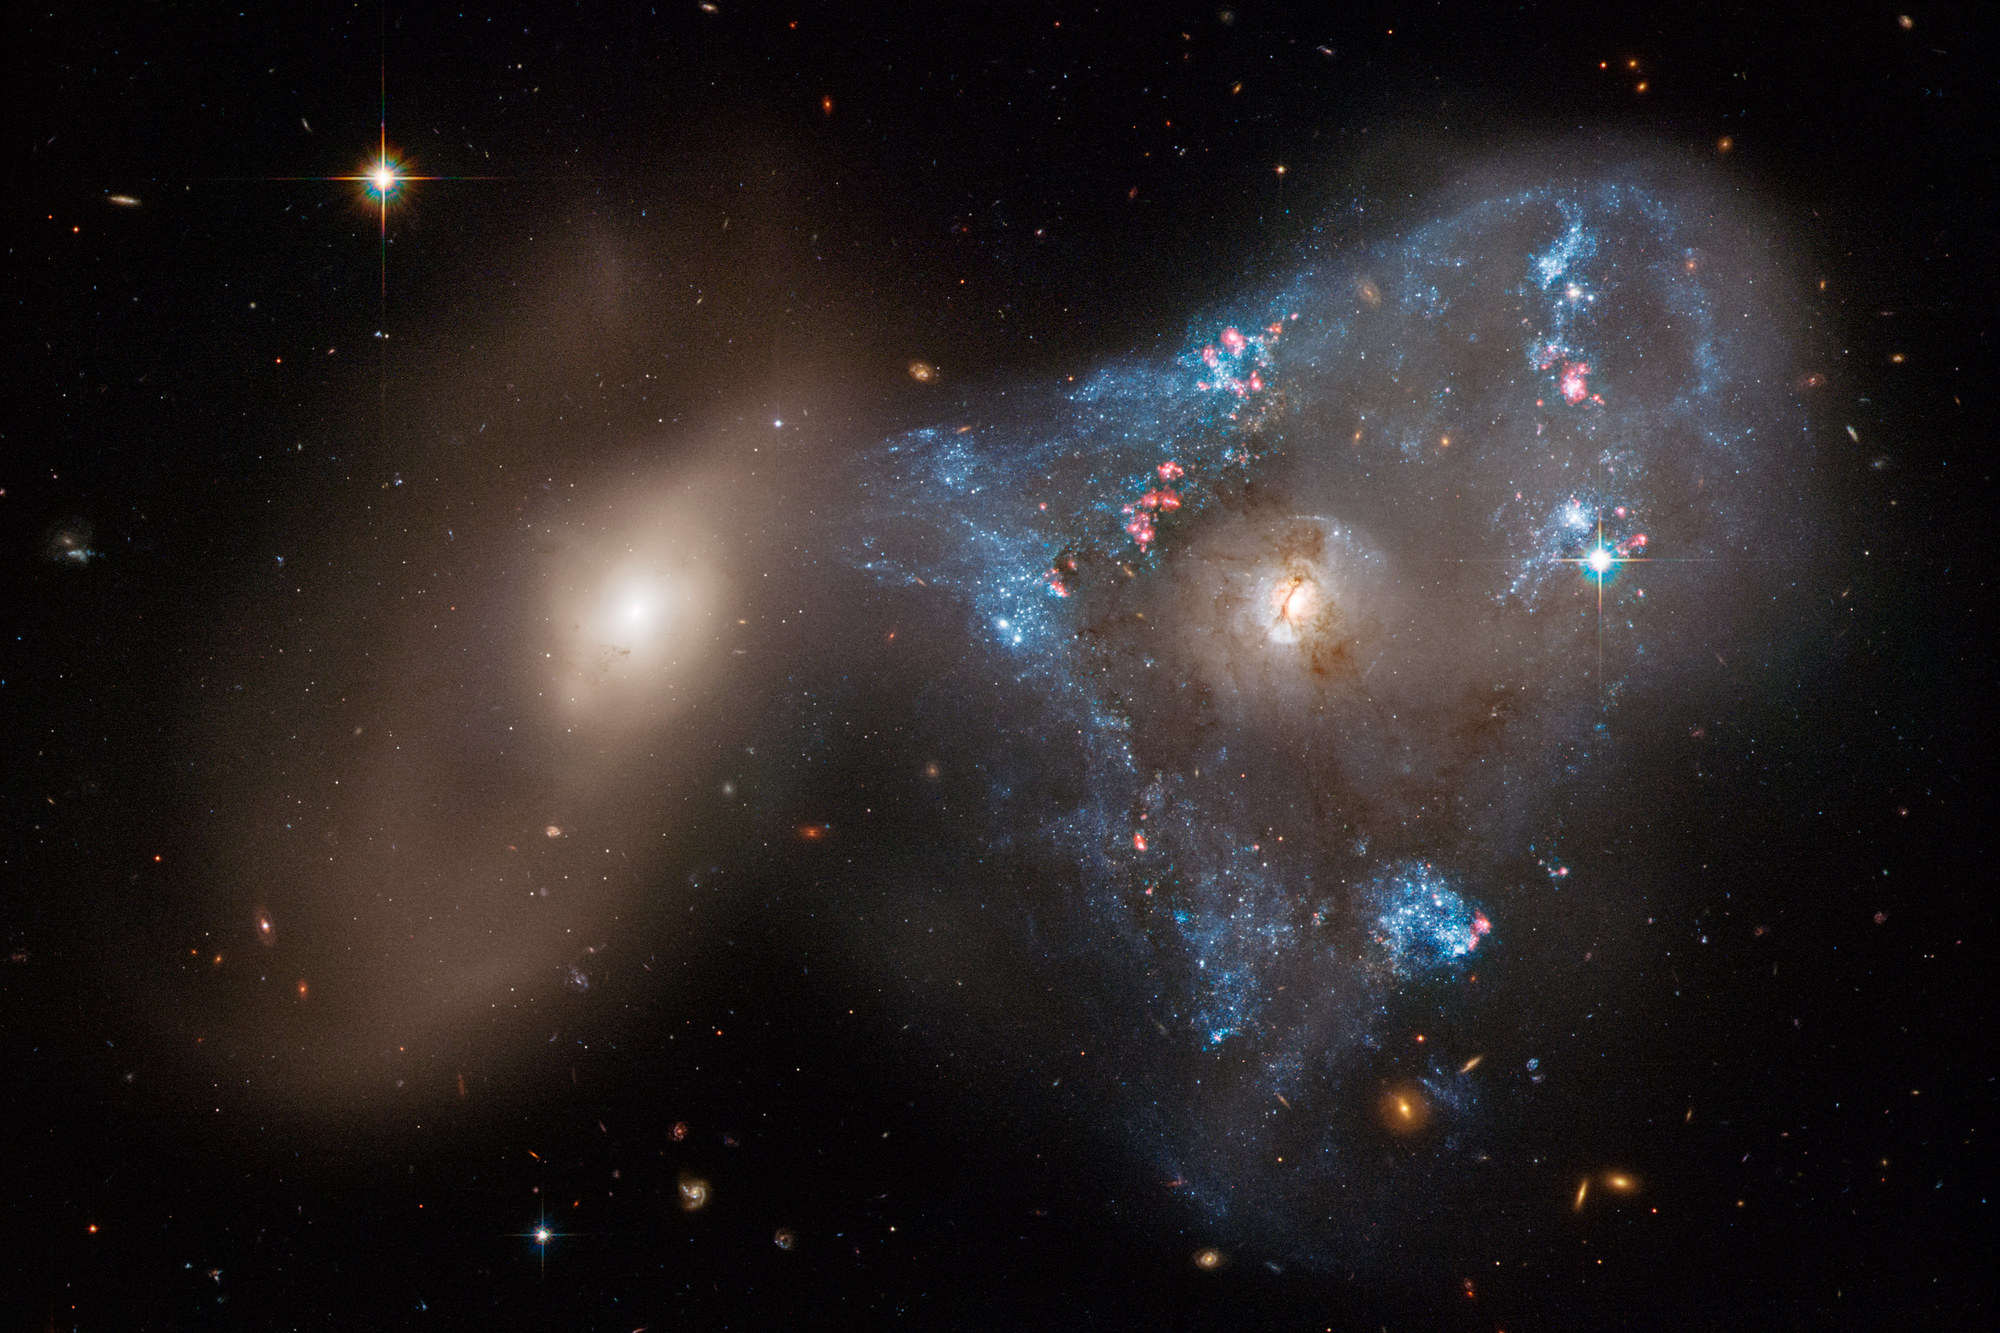 The Hubble telescope captures the stunning aftermath of two galaxies in collision